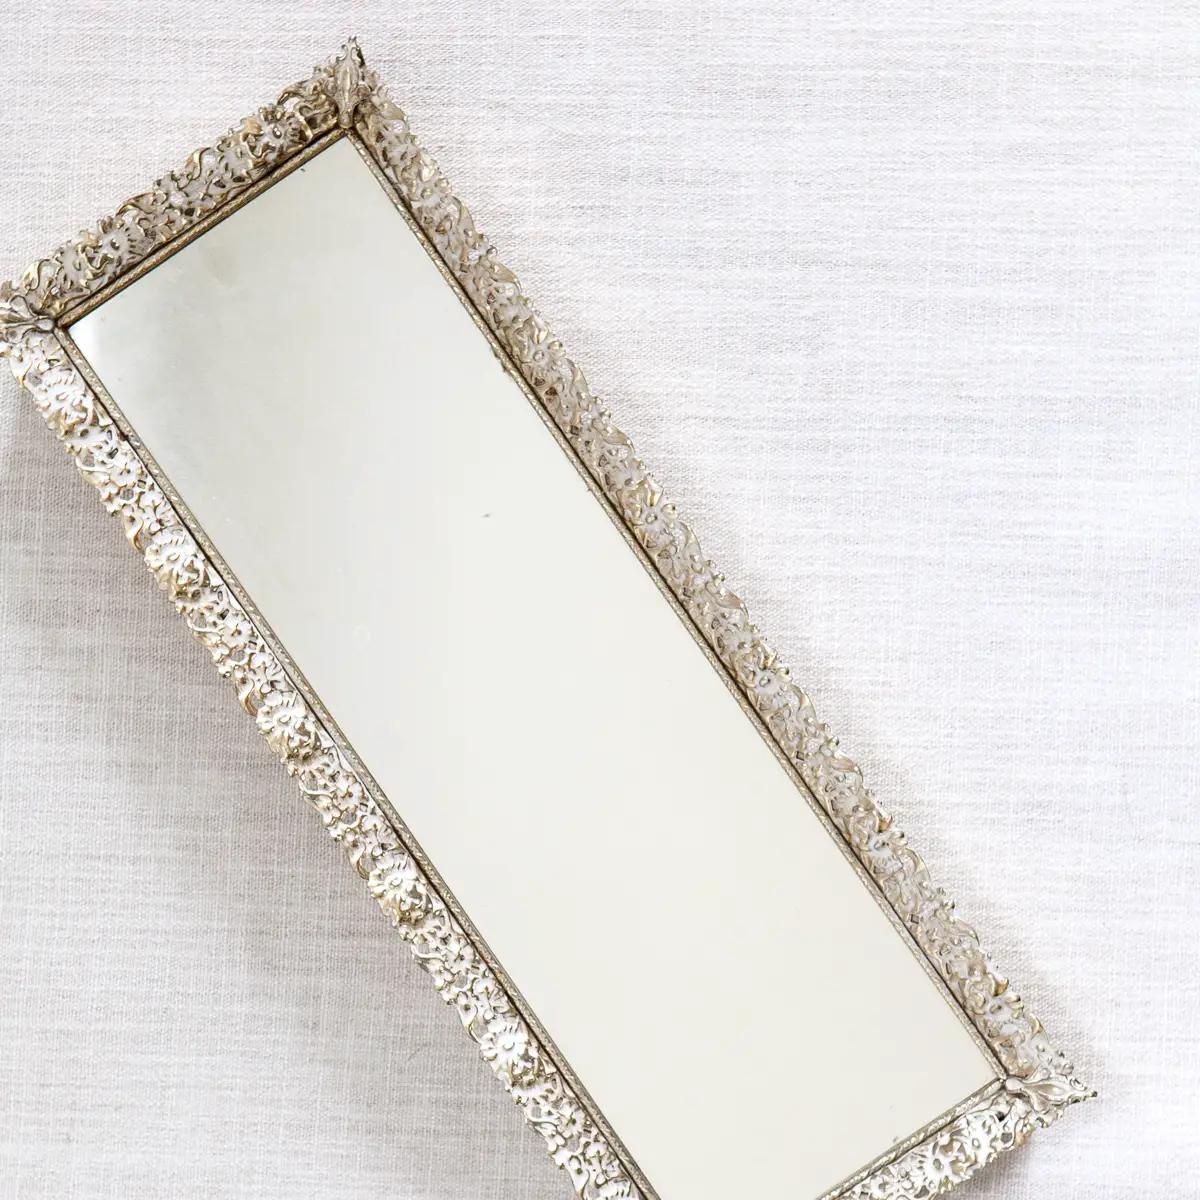 Master Bedroom Etsy Finds Brass Jewelry Tray - The One Room Challenge - That Homebird Life Blog